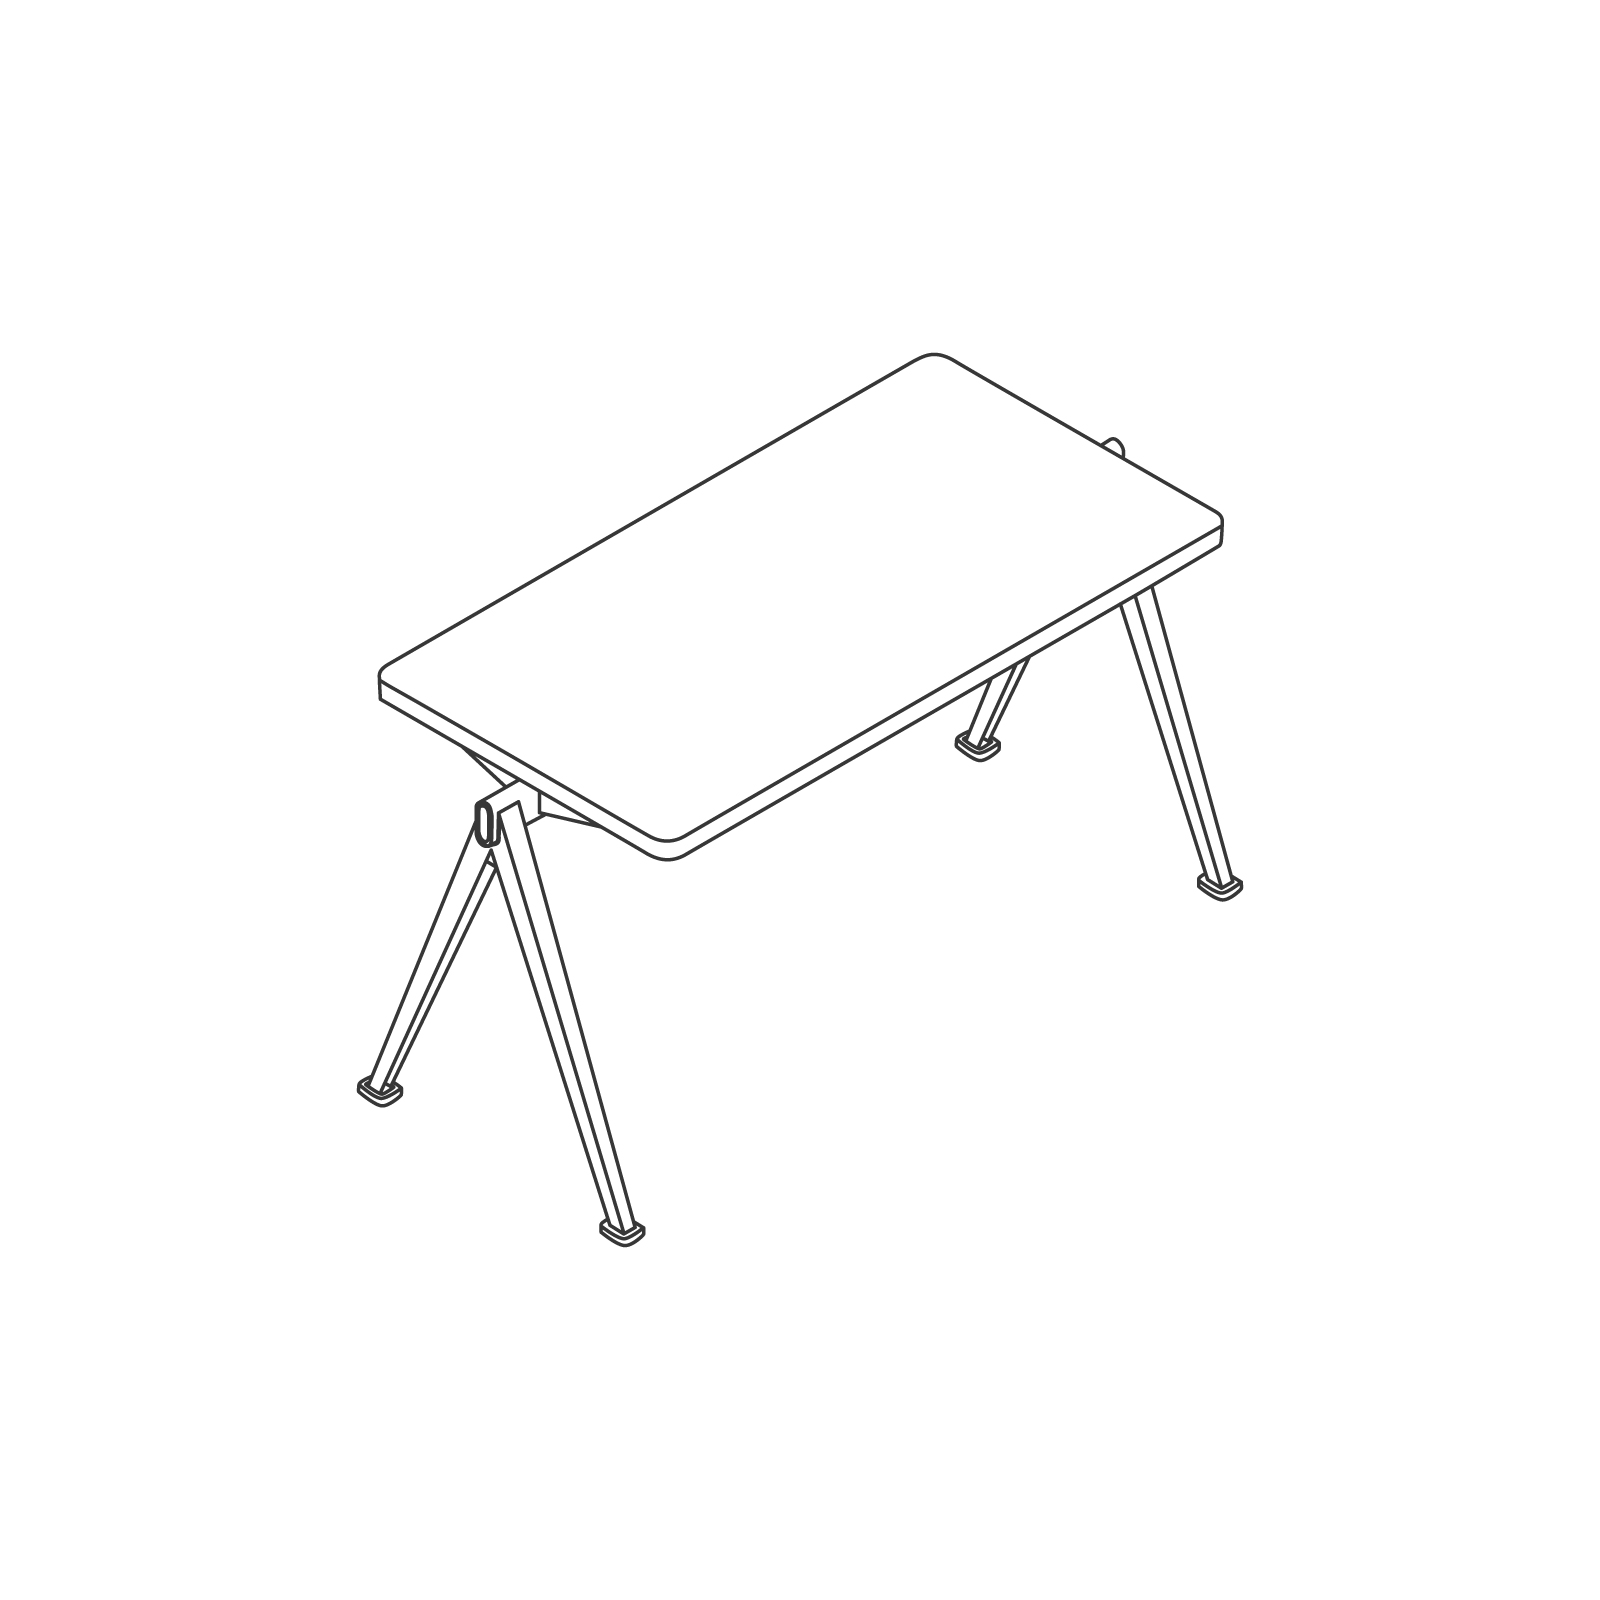 A line drawing - Pyramid Bench